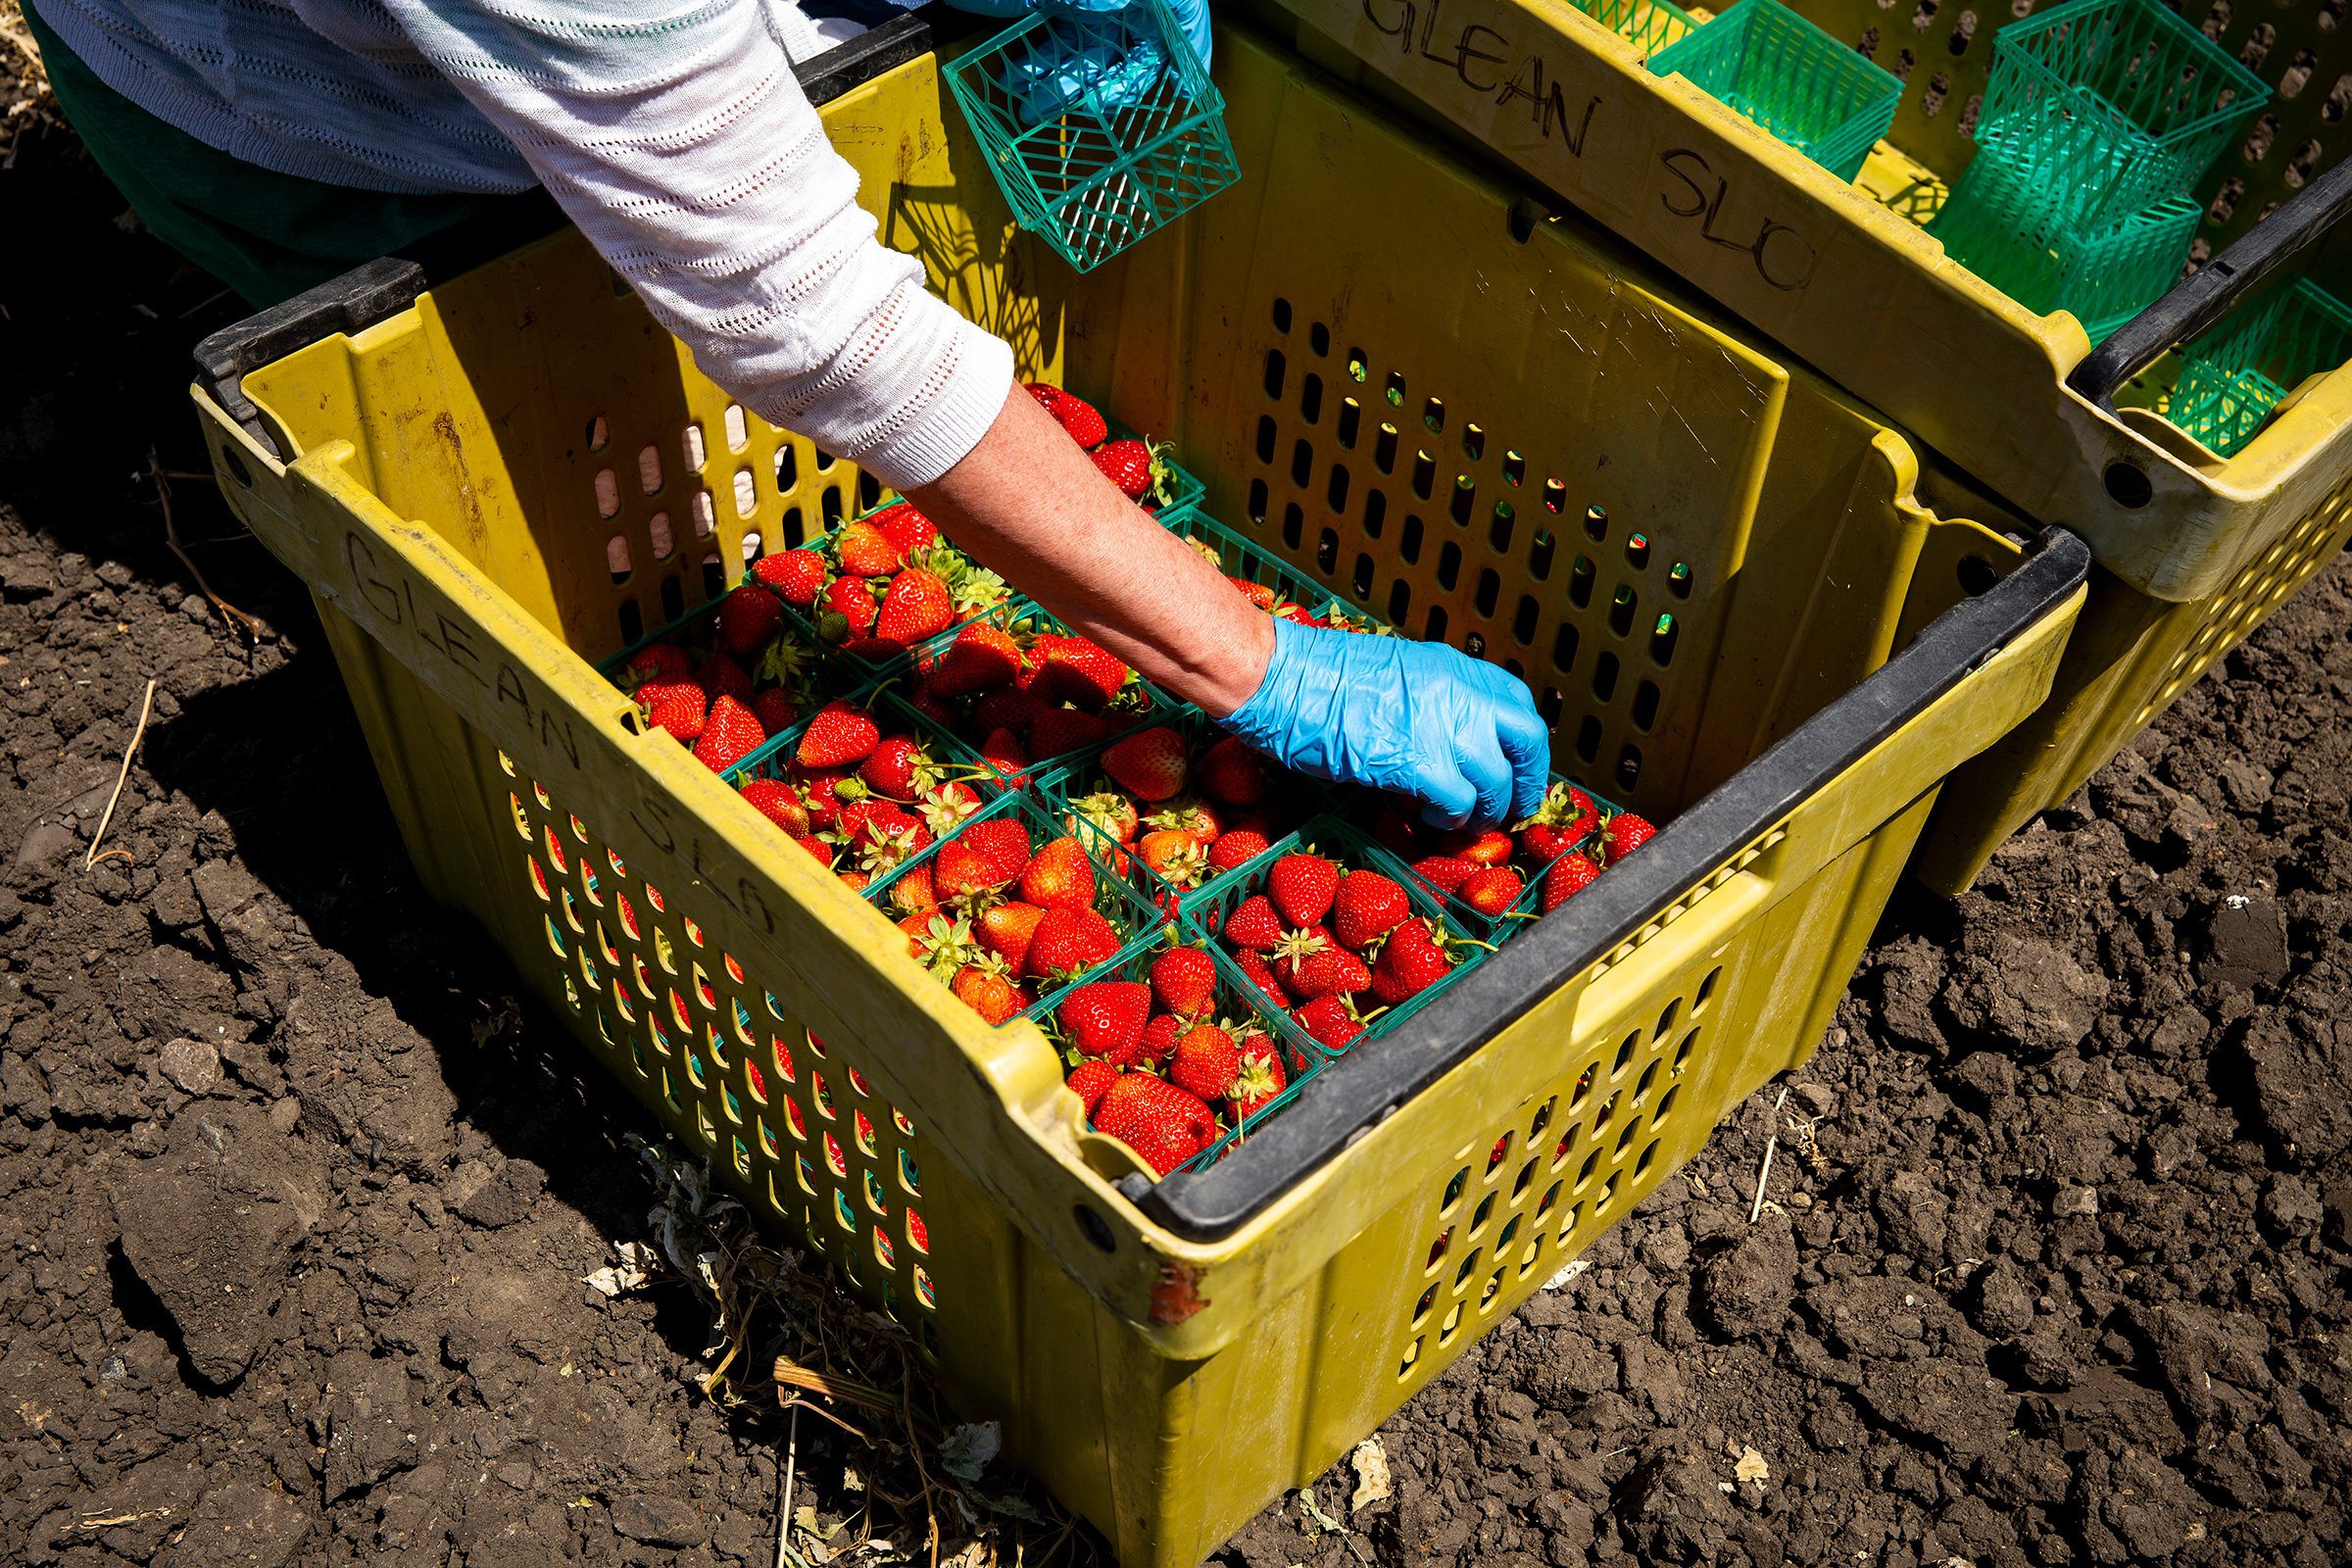 A volunteer with GleanSLO organizes strawberries in a bin at a farm in San Luis Obispo, Calif., on June 4, 2020. Before the pandemic, GleanSLO volunteers typically gleaned from backyard fruit trees—now they visit farms. (Jenna Schoenefeld—The New York Times/Redux)